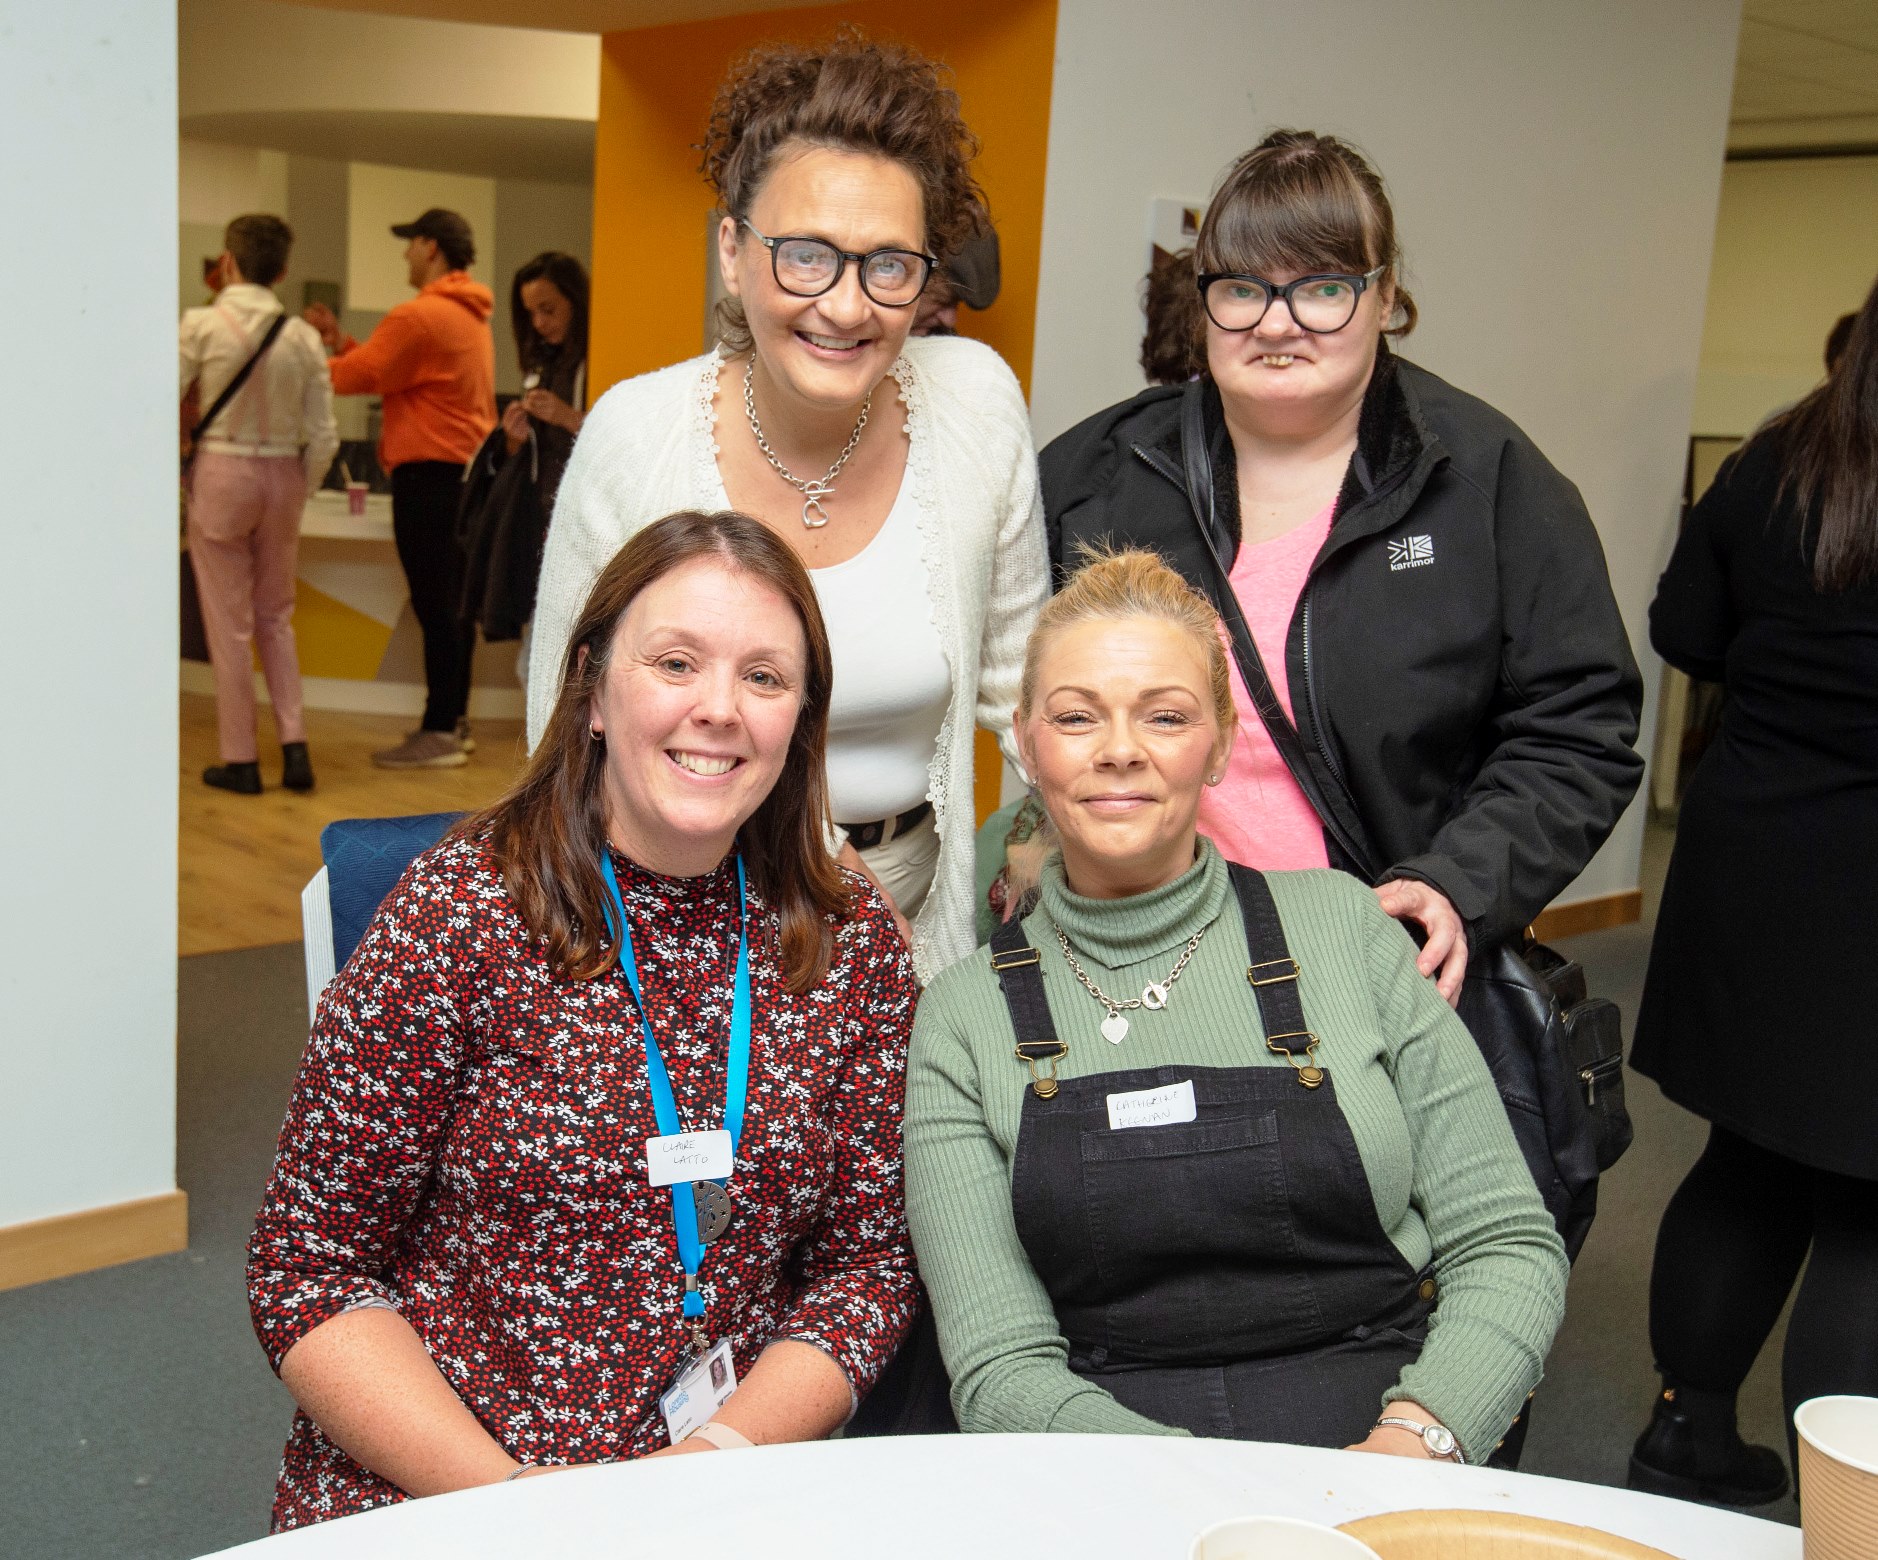 Loretto HOusing held its 2019 AGM recently